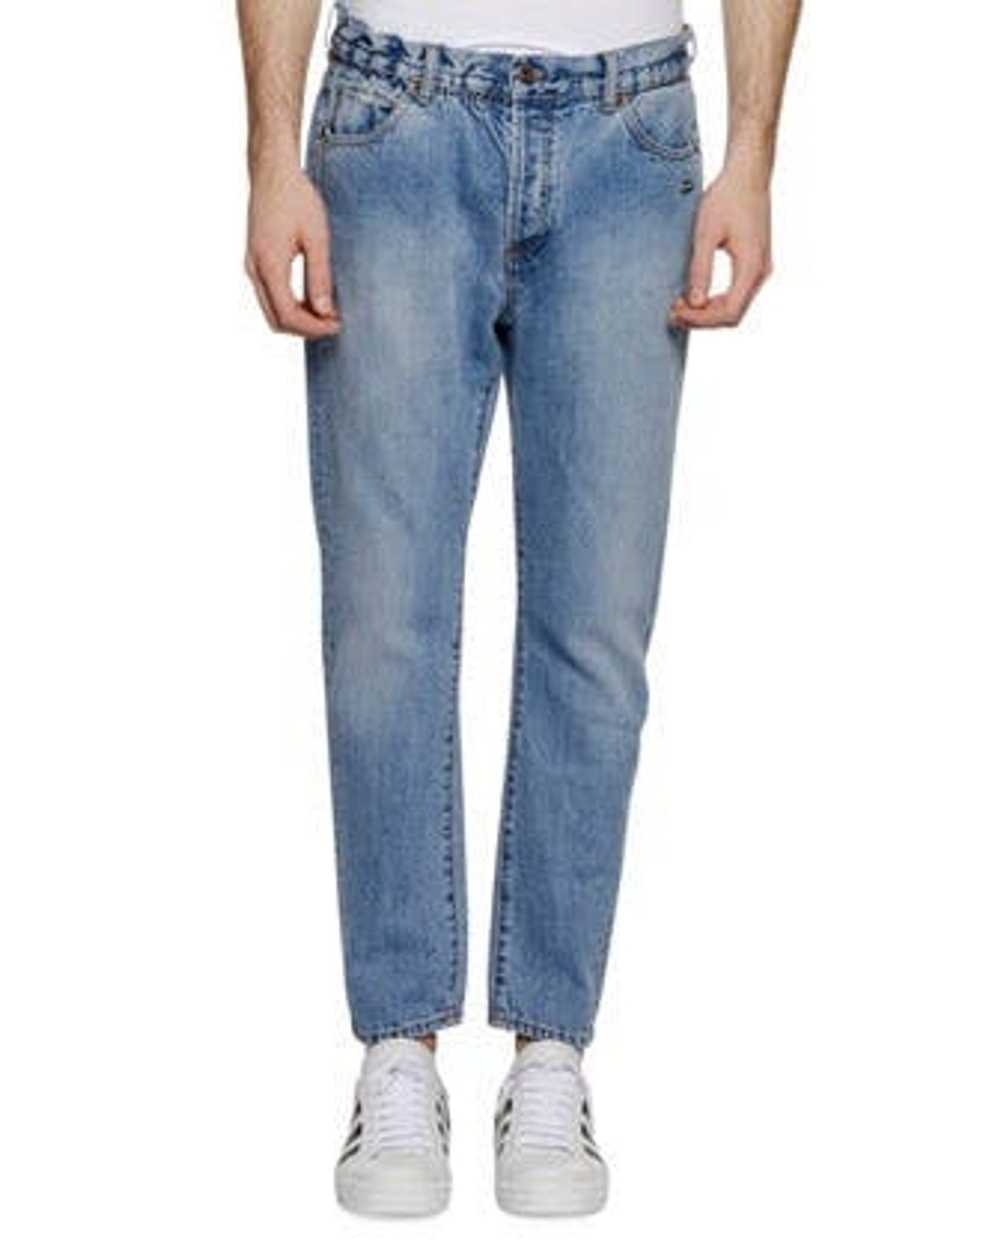 Off-White Off-white slim jeans low crotch - image 1